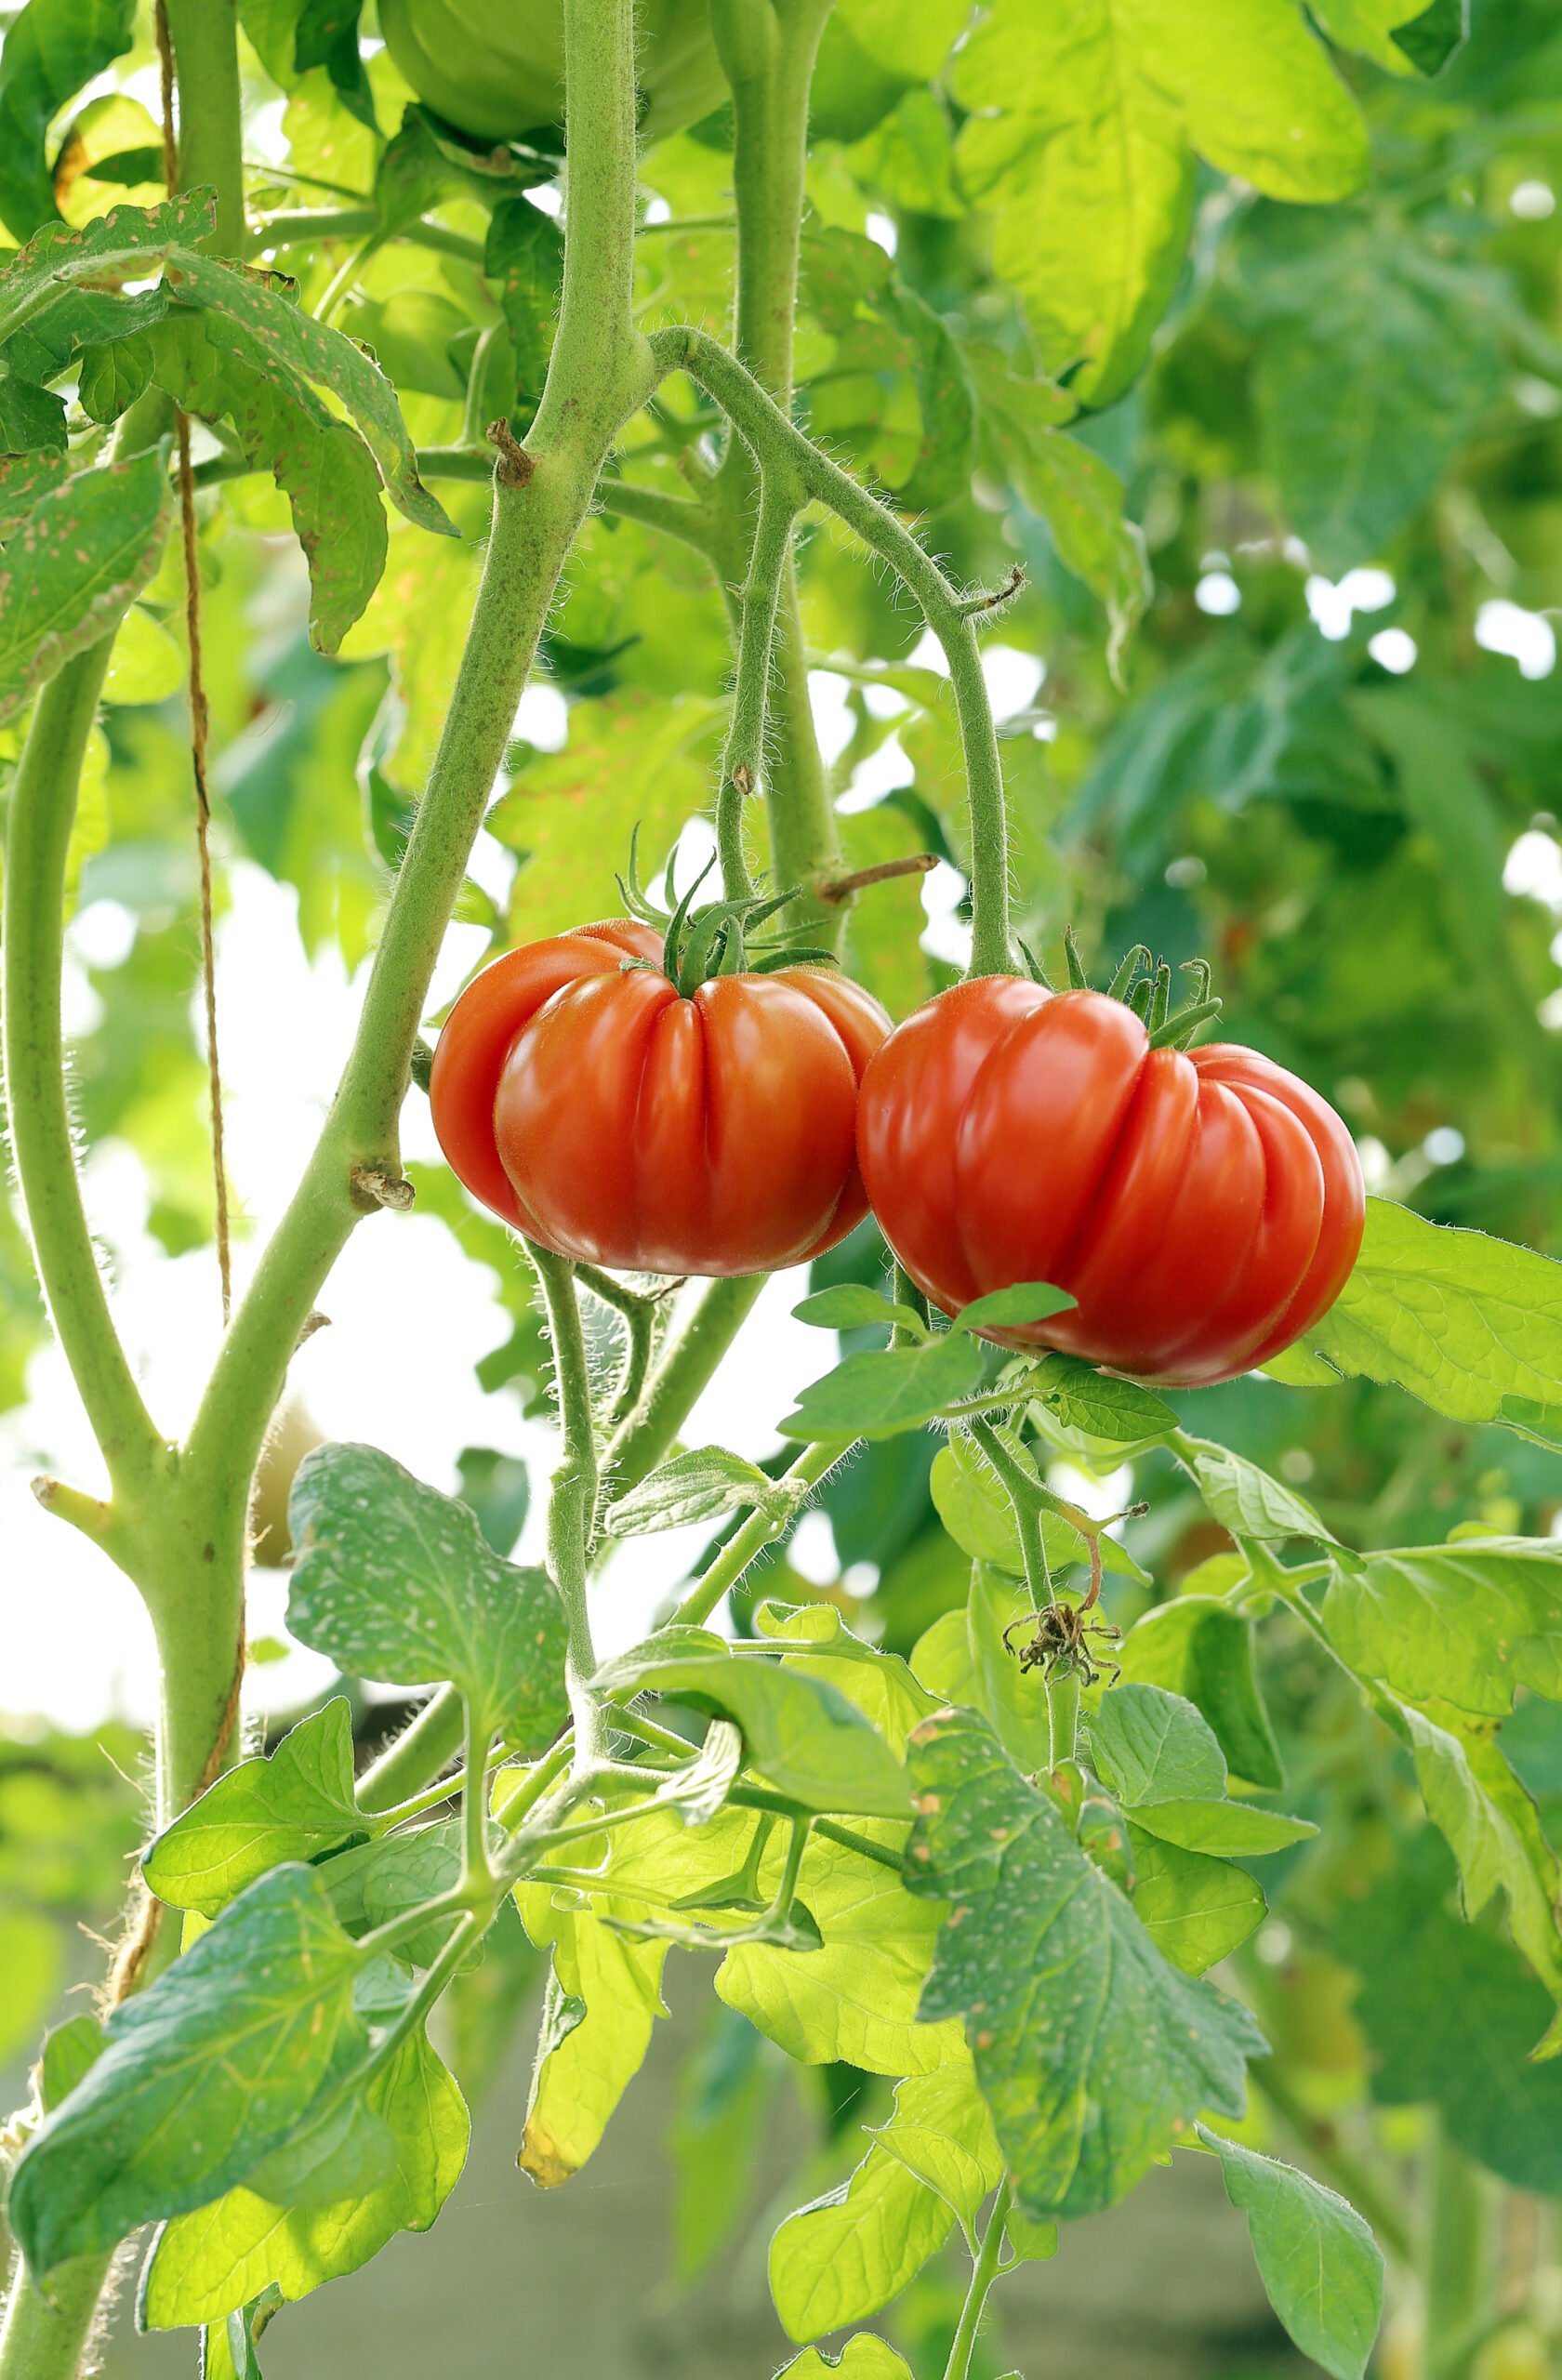 Do Tomato Plants Die After Fruiting